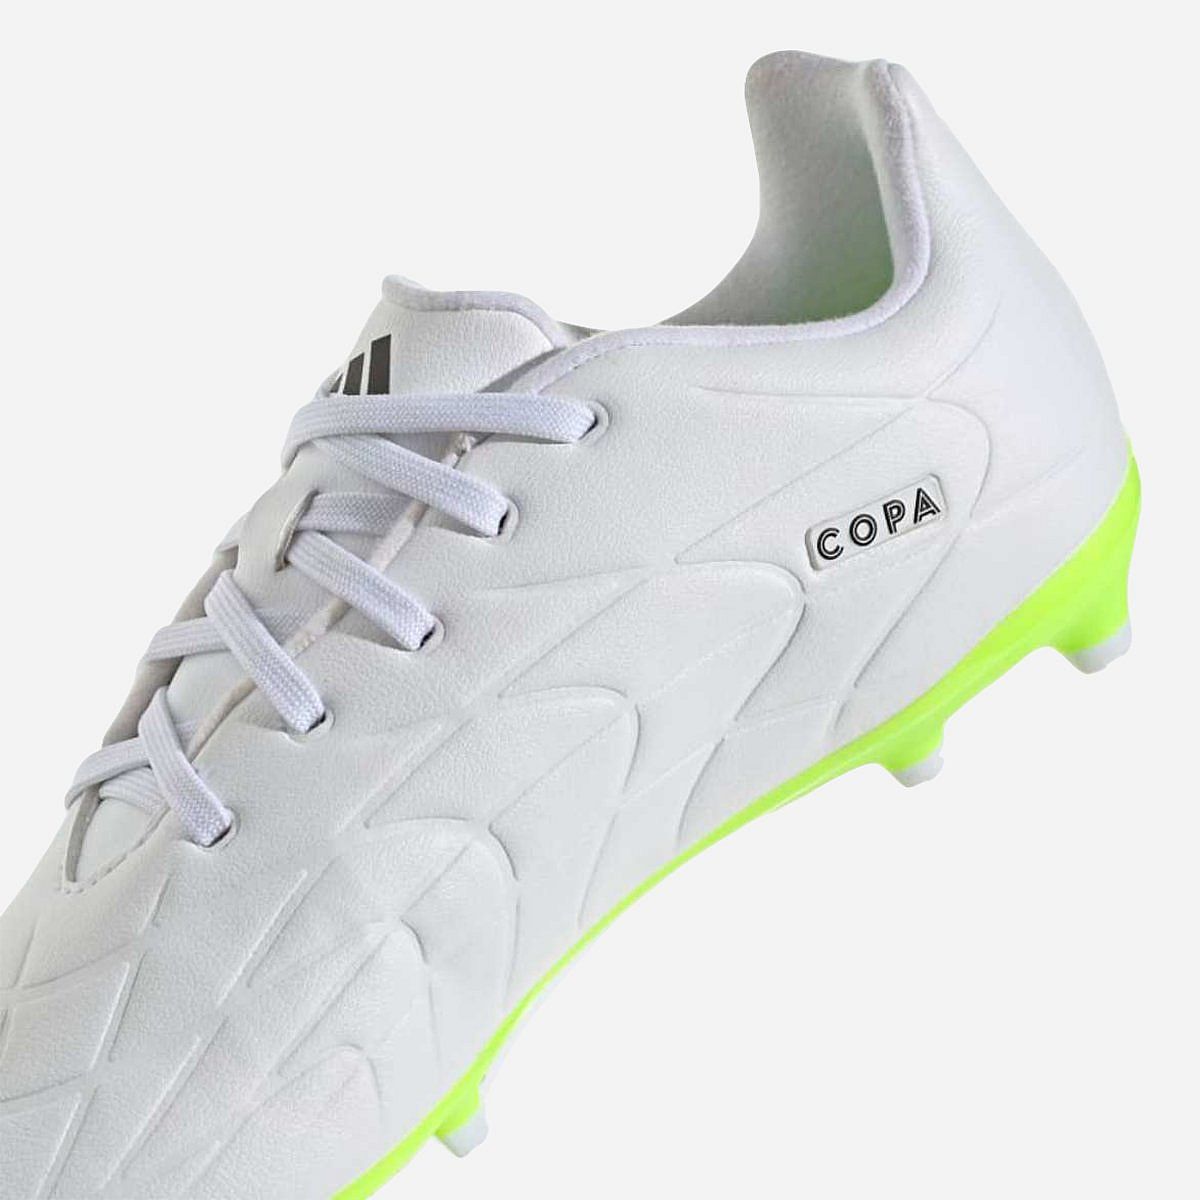 AN301871 Copa Pure.3 Football boots Firm Ground